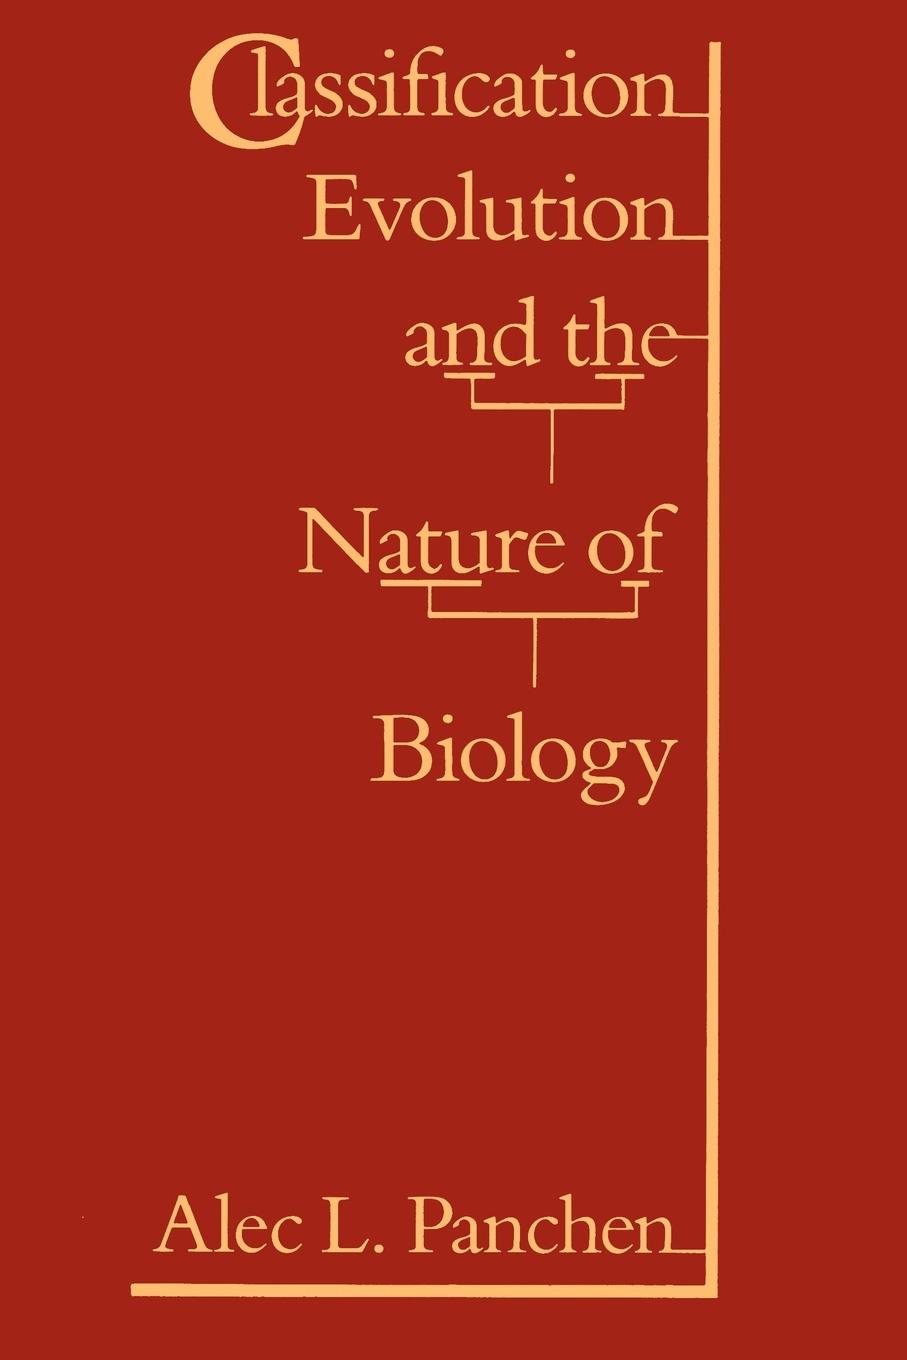 Classification, Evolution, and the Nature of Biology - Panchen, Alec L.